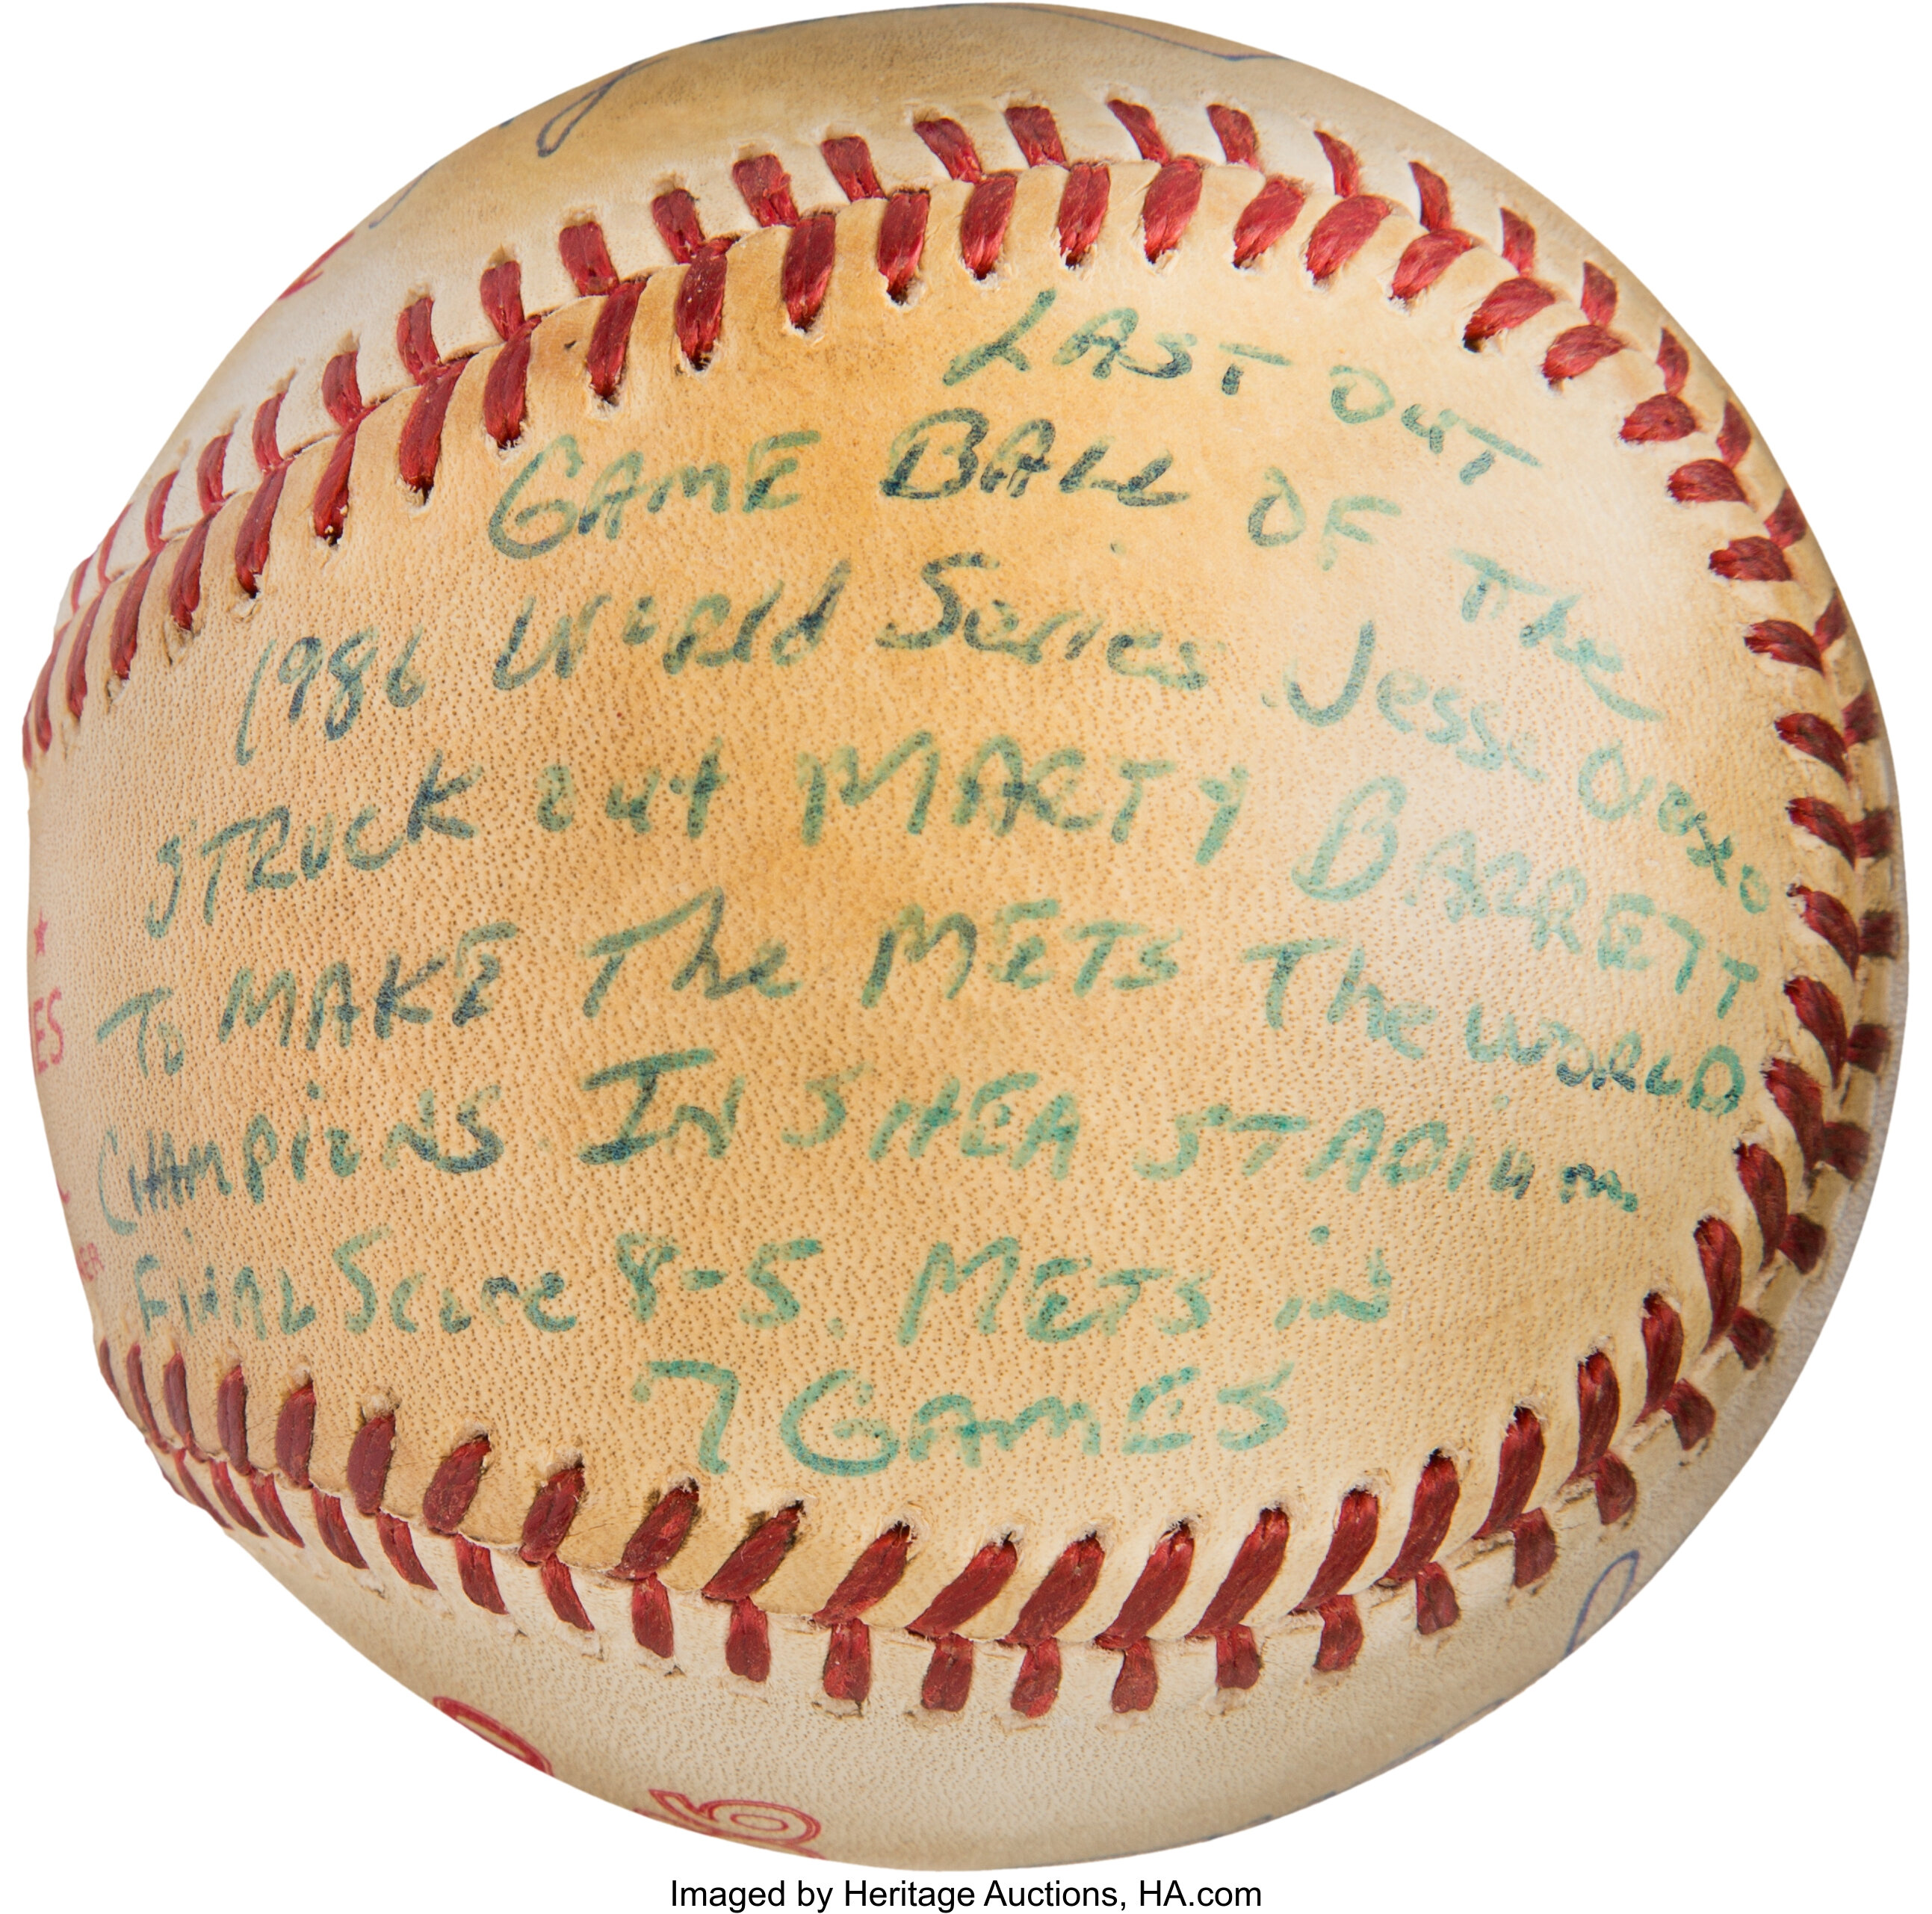 1986 World Series Last Out Baseball from The Gary Carter, Lot #52142